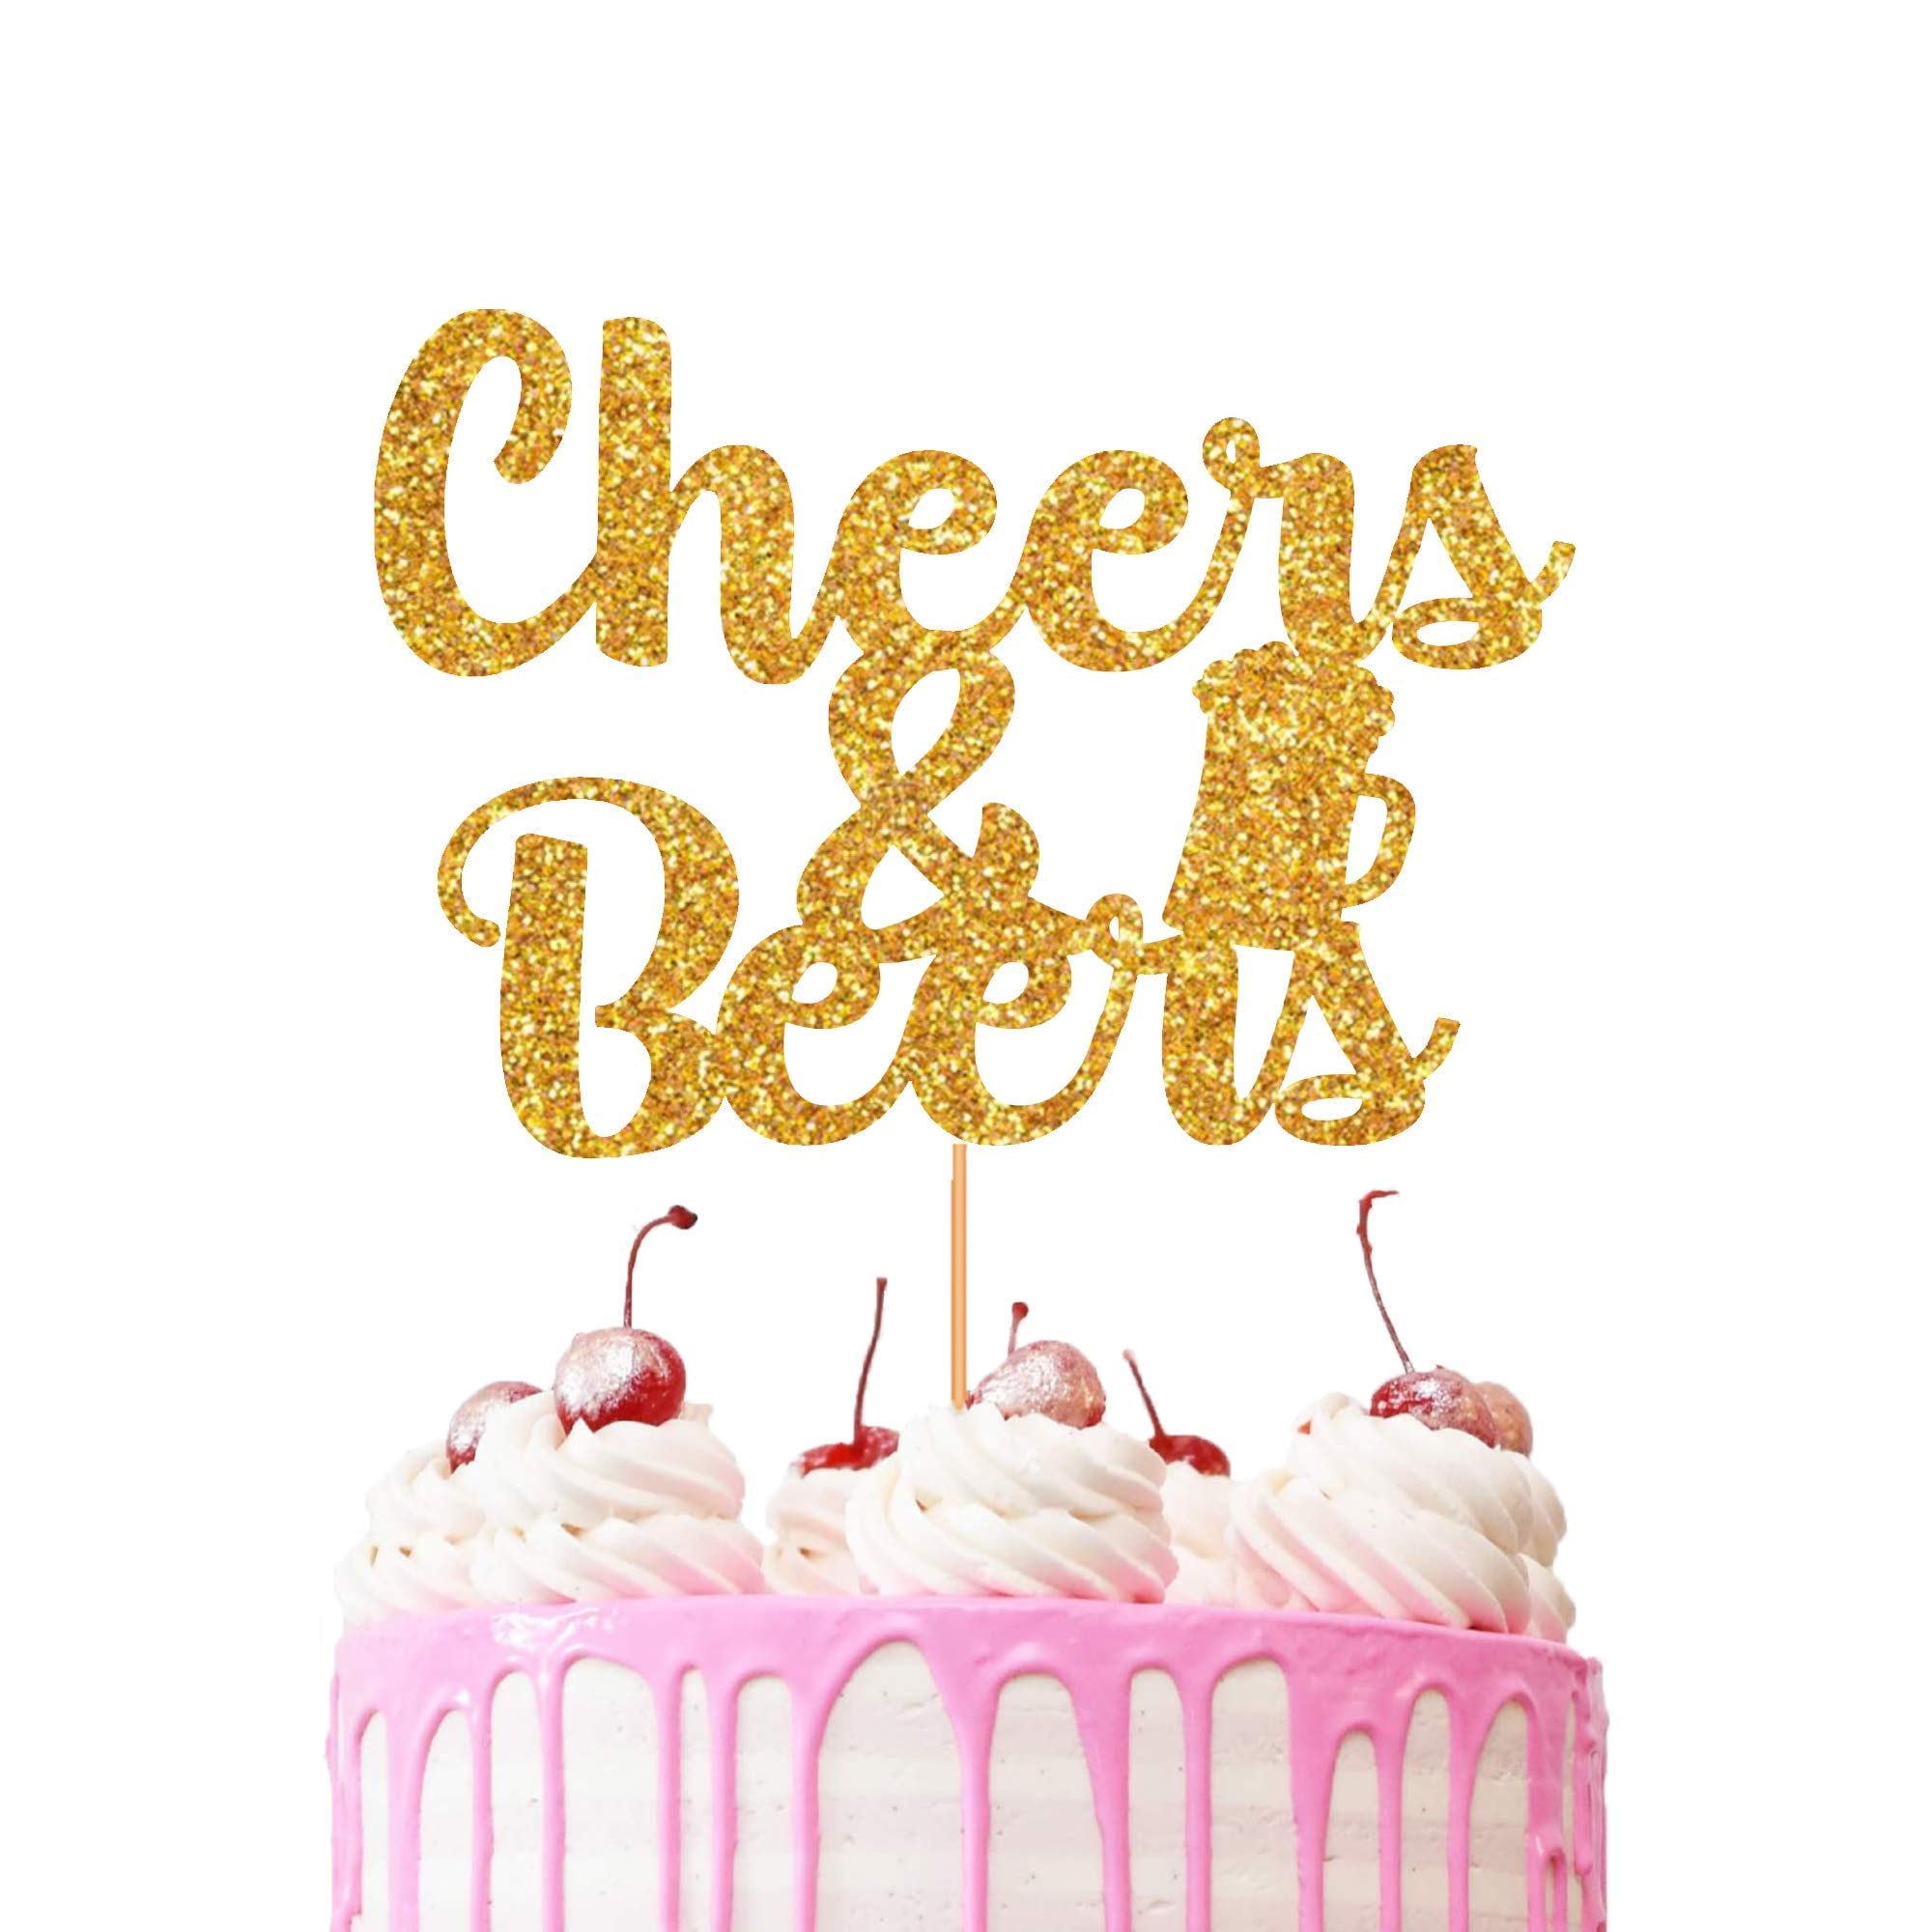 Cheers & Beers Cake Topper Glitter Cardstock Party Favour Party Decoration Cake Toppers (Gold)